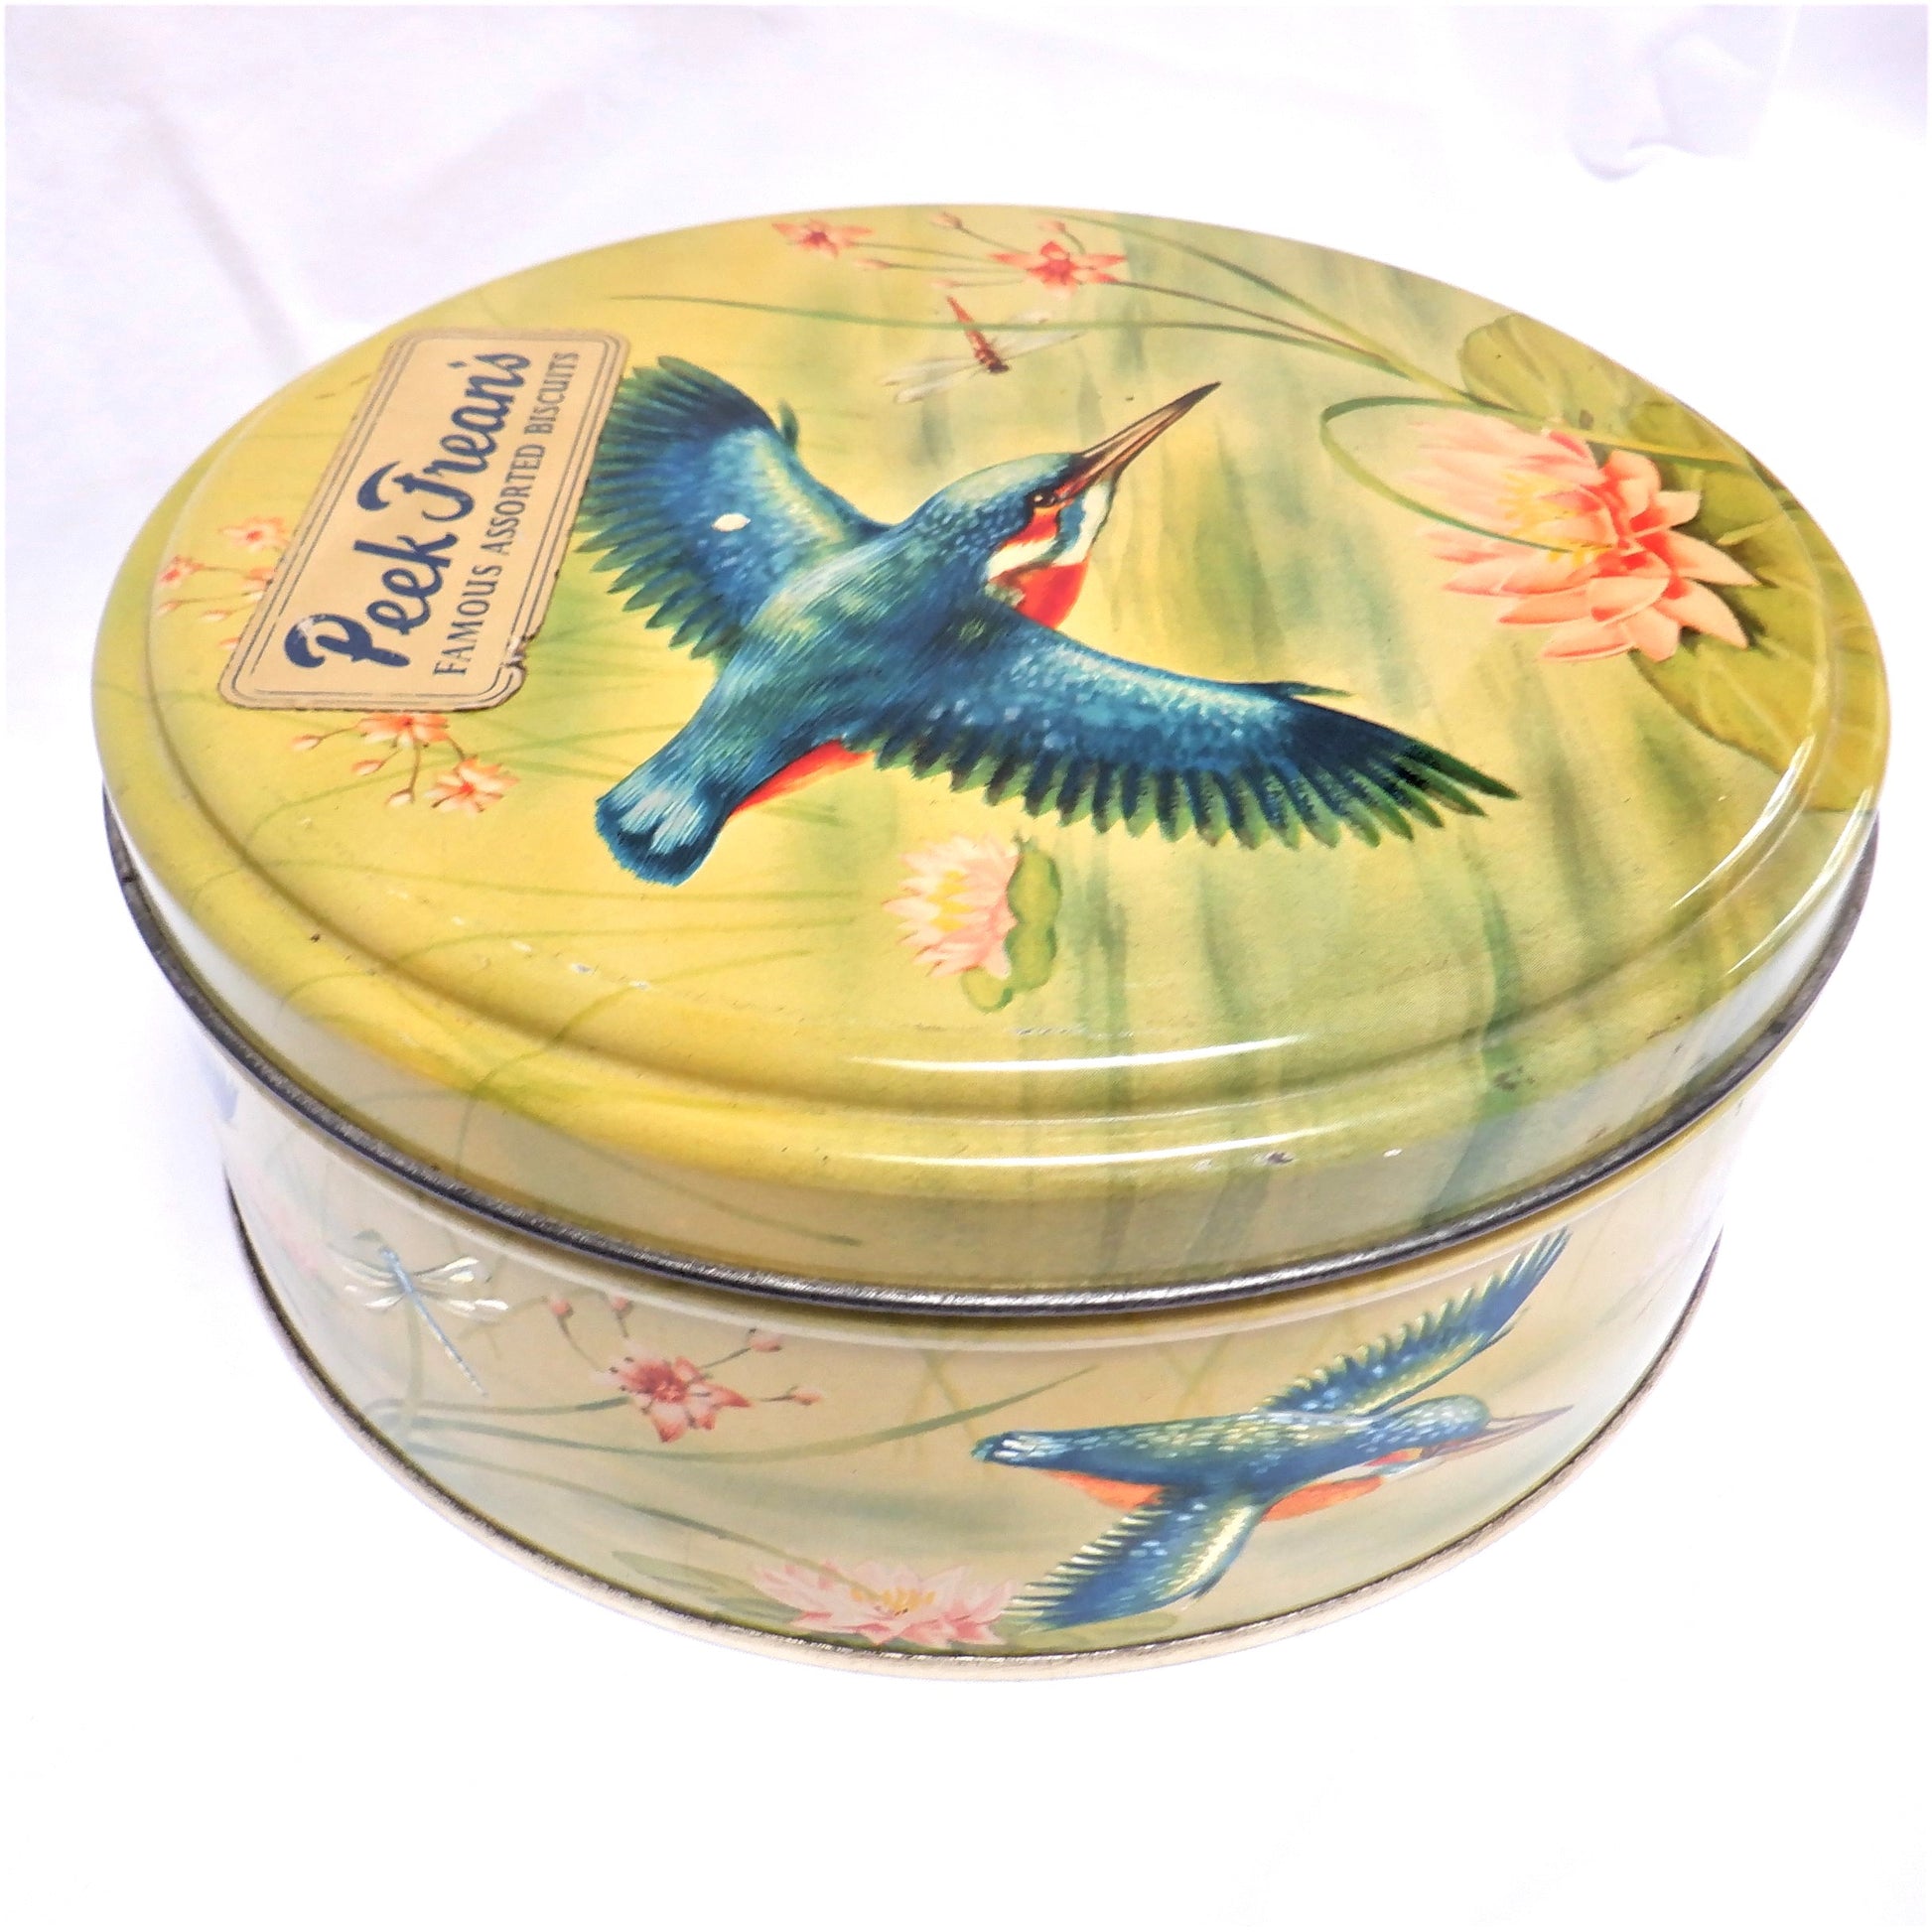 Vintage Peek Frean's Famous Assorted Biscuits Tin Can Container